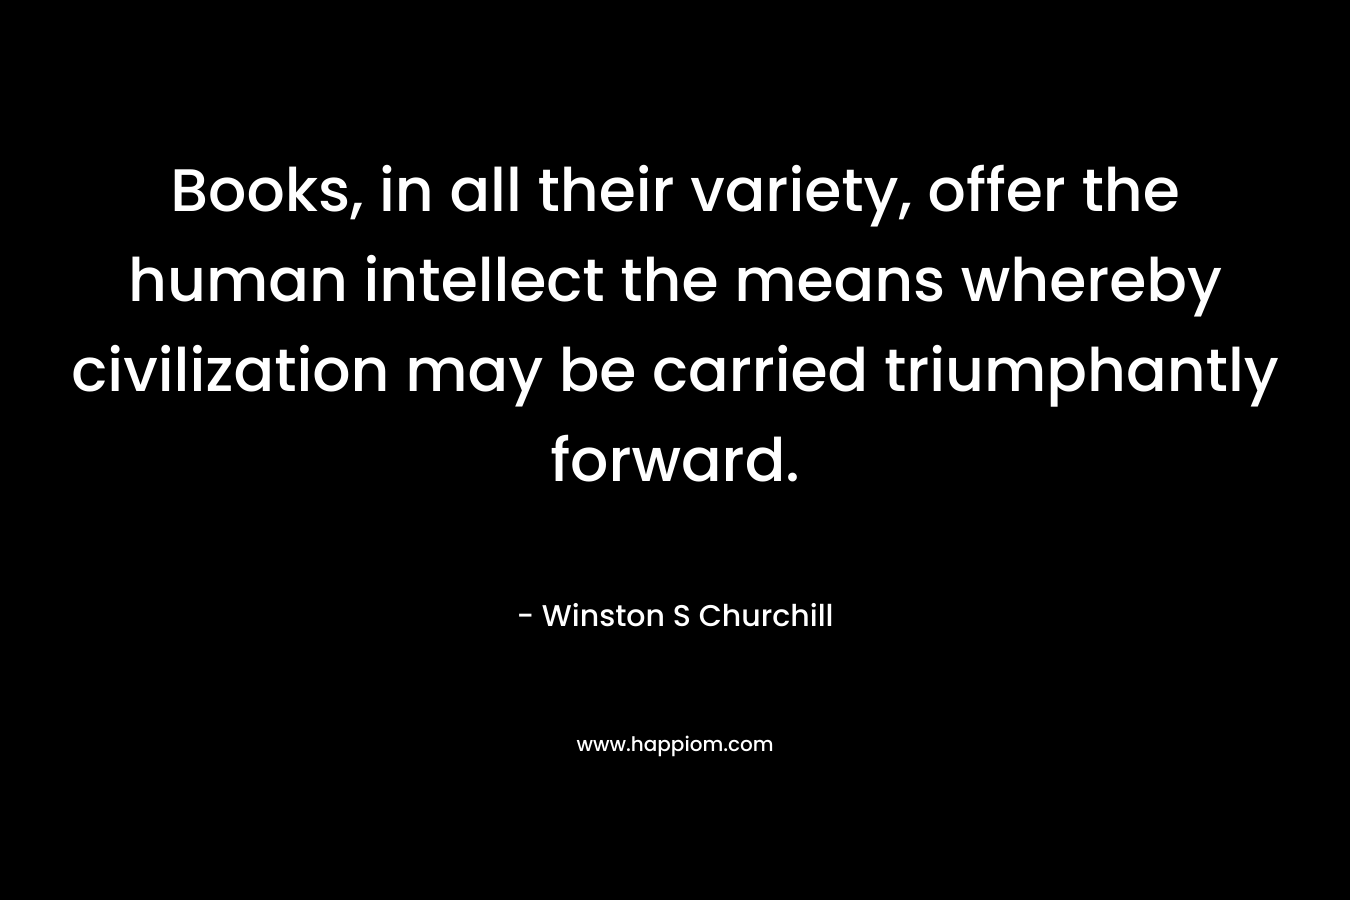 Books, in all their variety, offer the human intellect the means whereby civilization may be carried triumphantly forward.